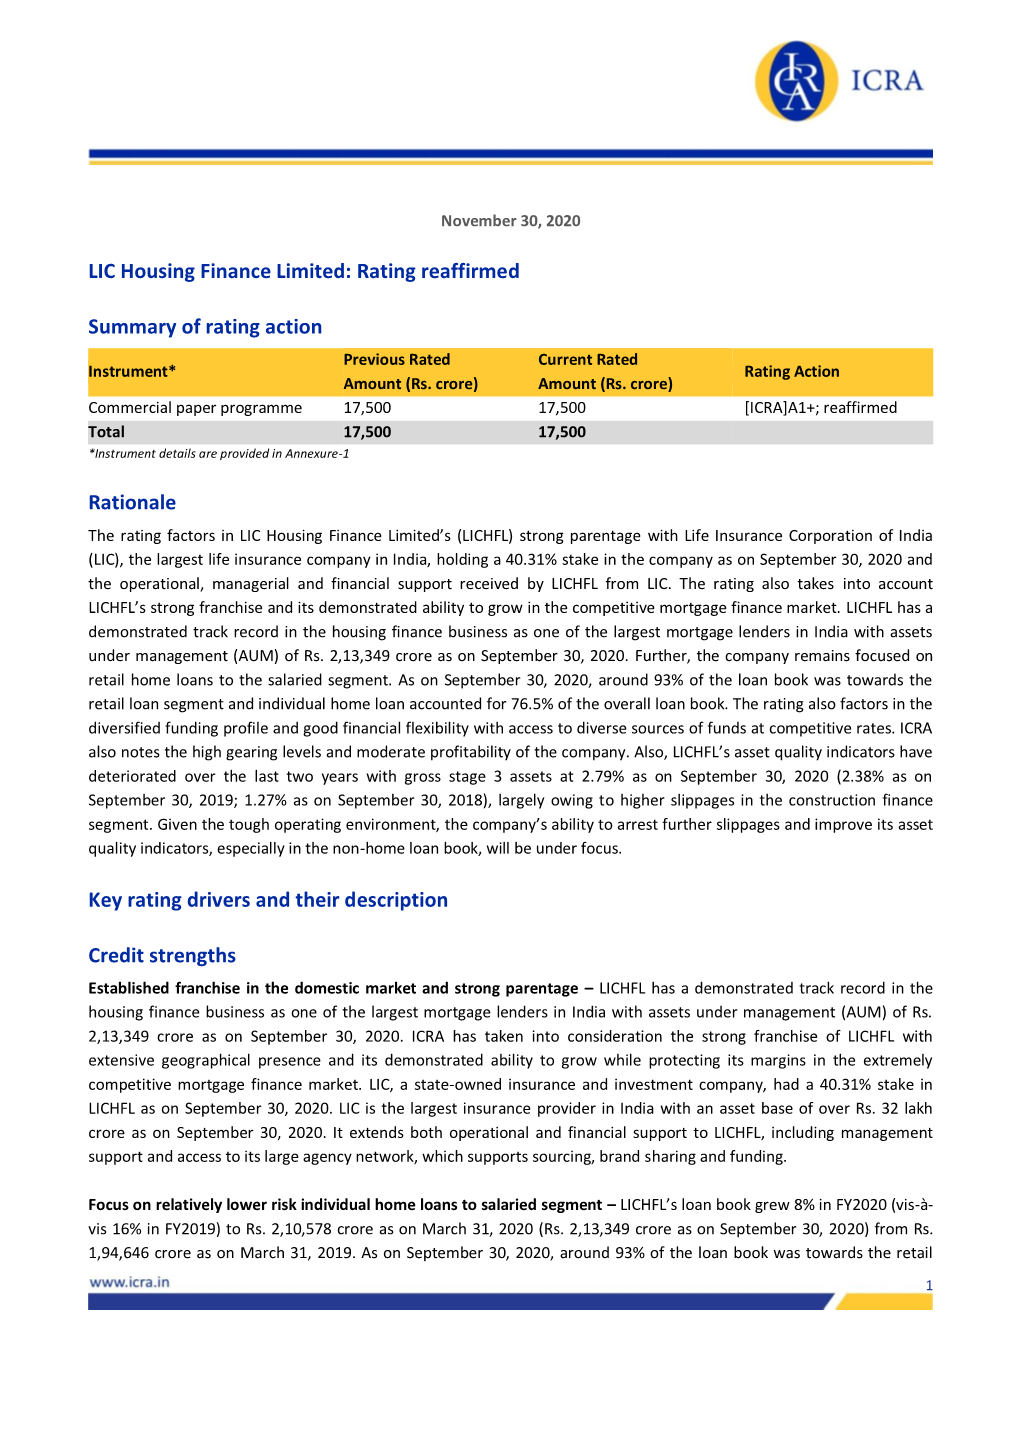 LIC Housing Finance Limited: Rating Reaffirmed Summary of Rating Action